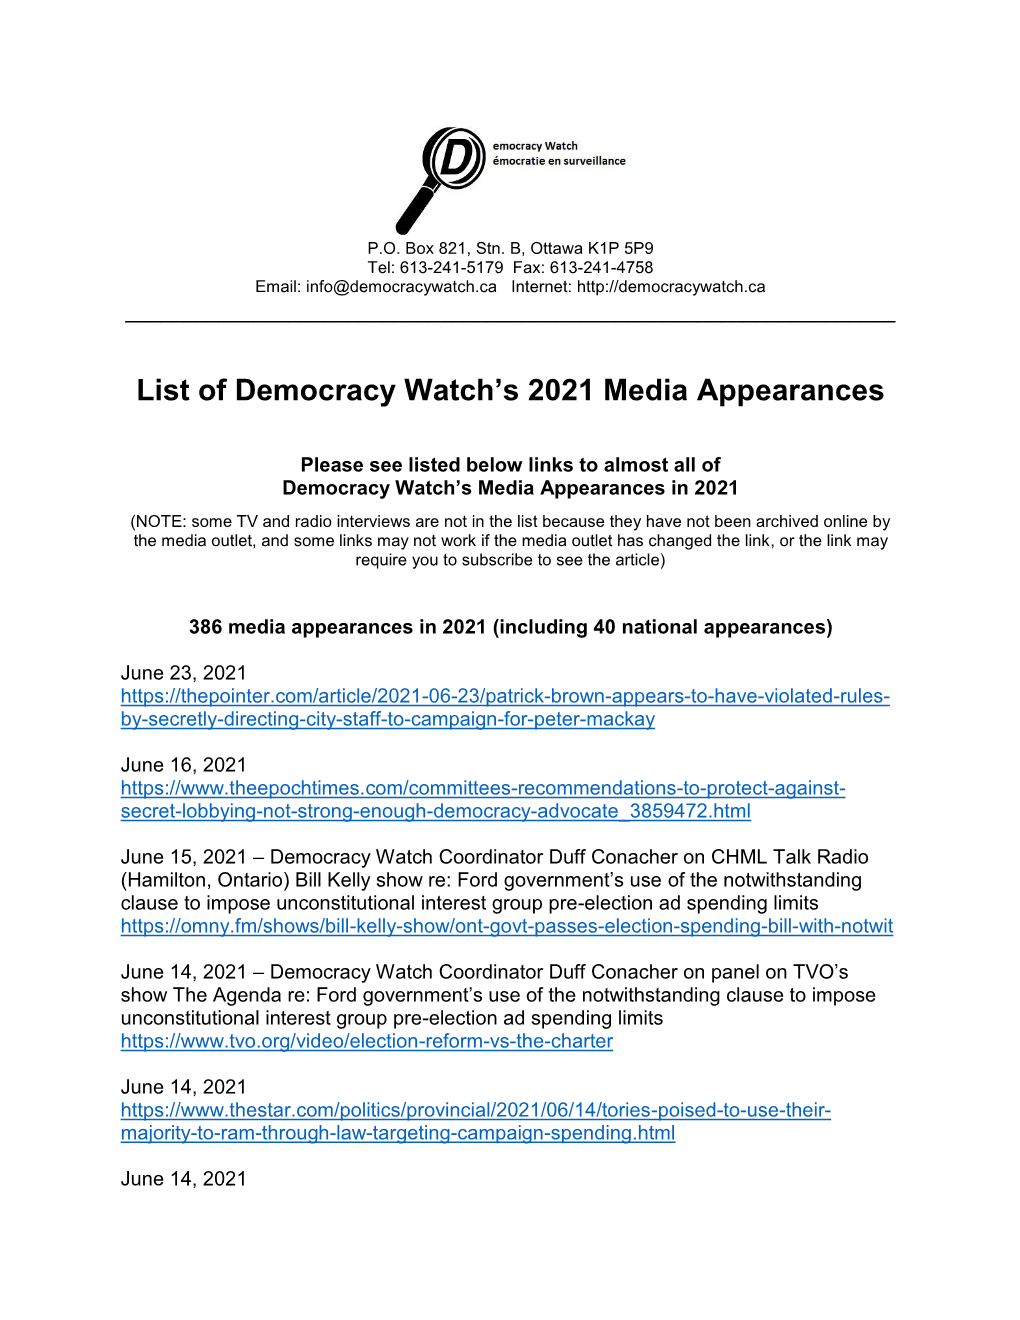 List of Democracy Watch's 2021 Media Appearances